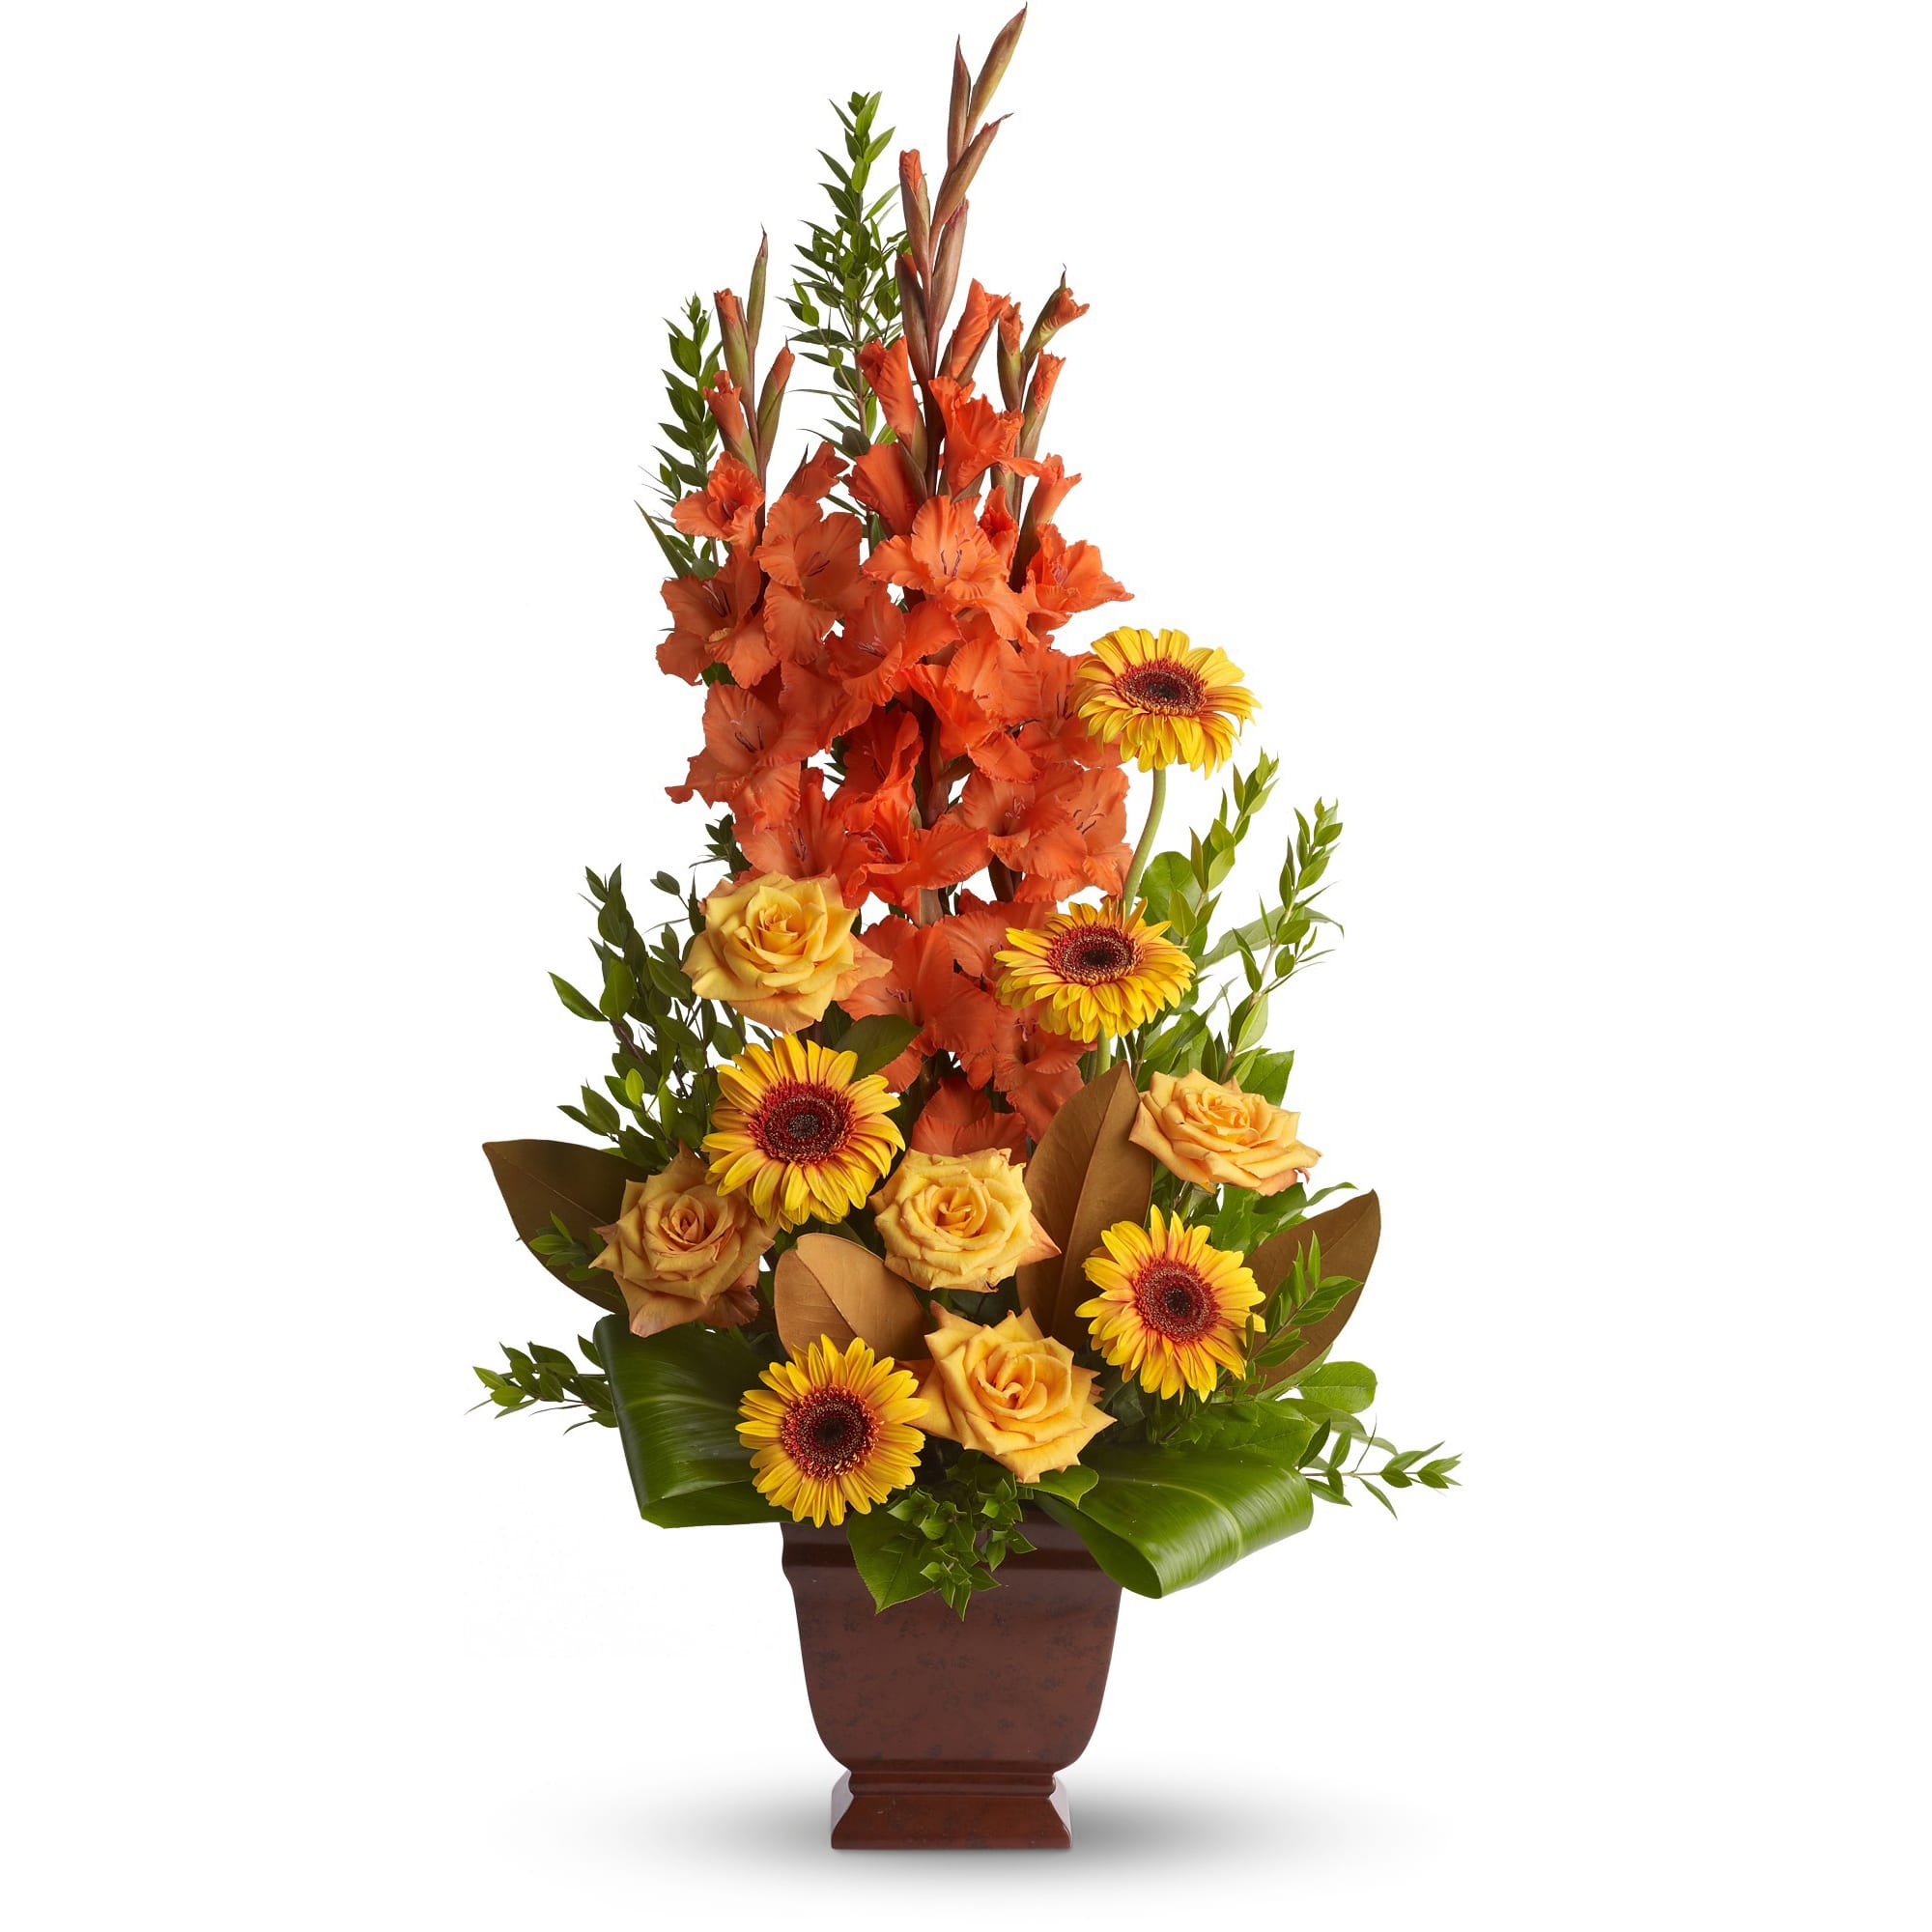 Sentimental Dreams - Because you will remember the loved one with every sunrise and every sunset. Because someone special made your life brighter. For these reasons and more, this brilliant arrangement will be much appreciated. 